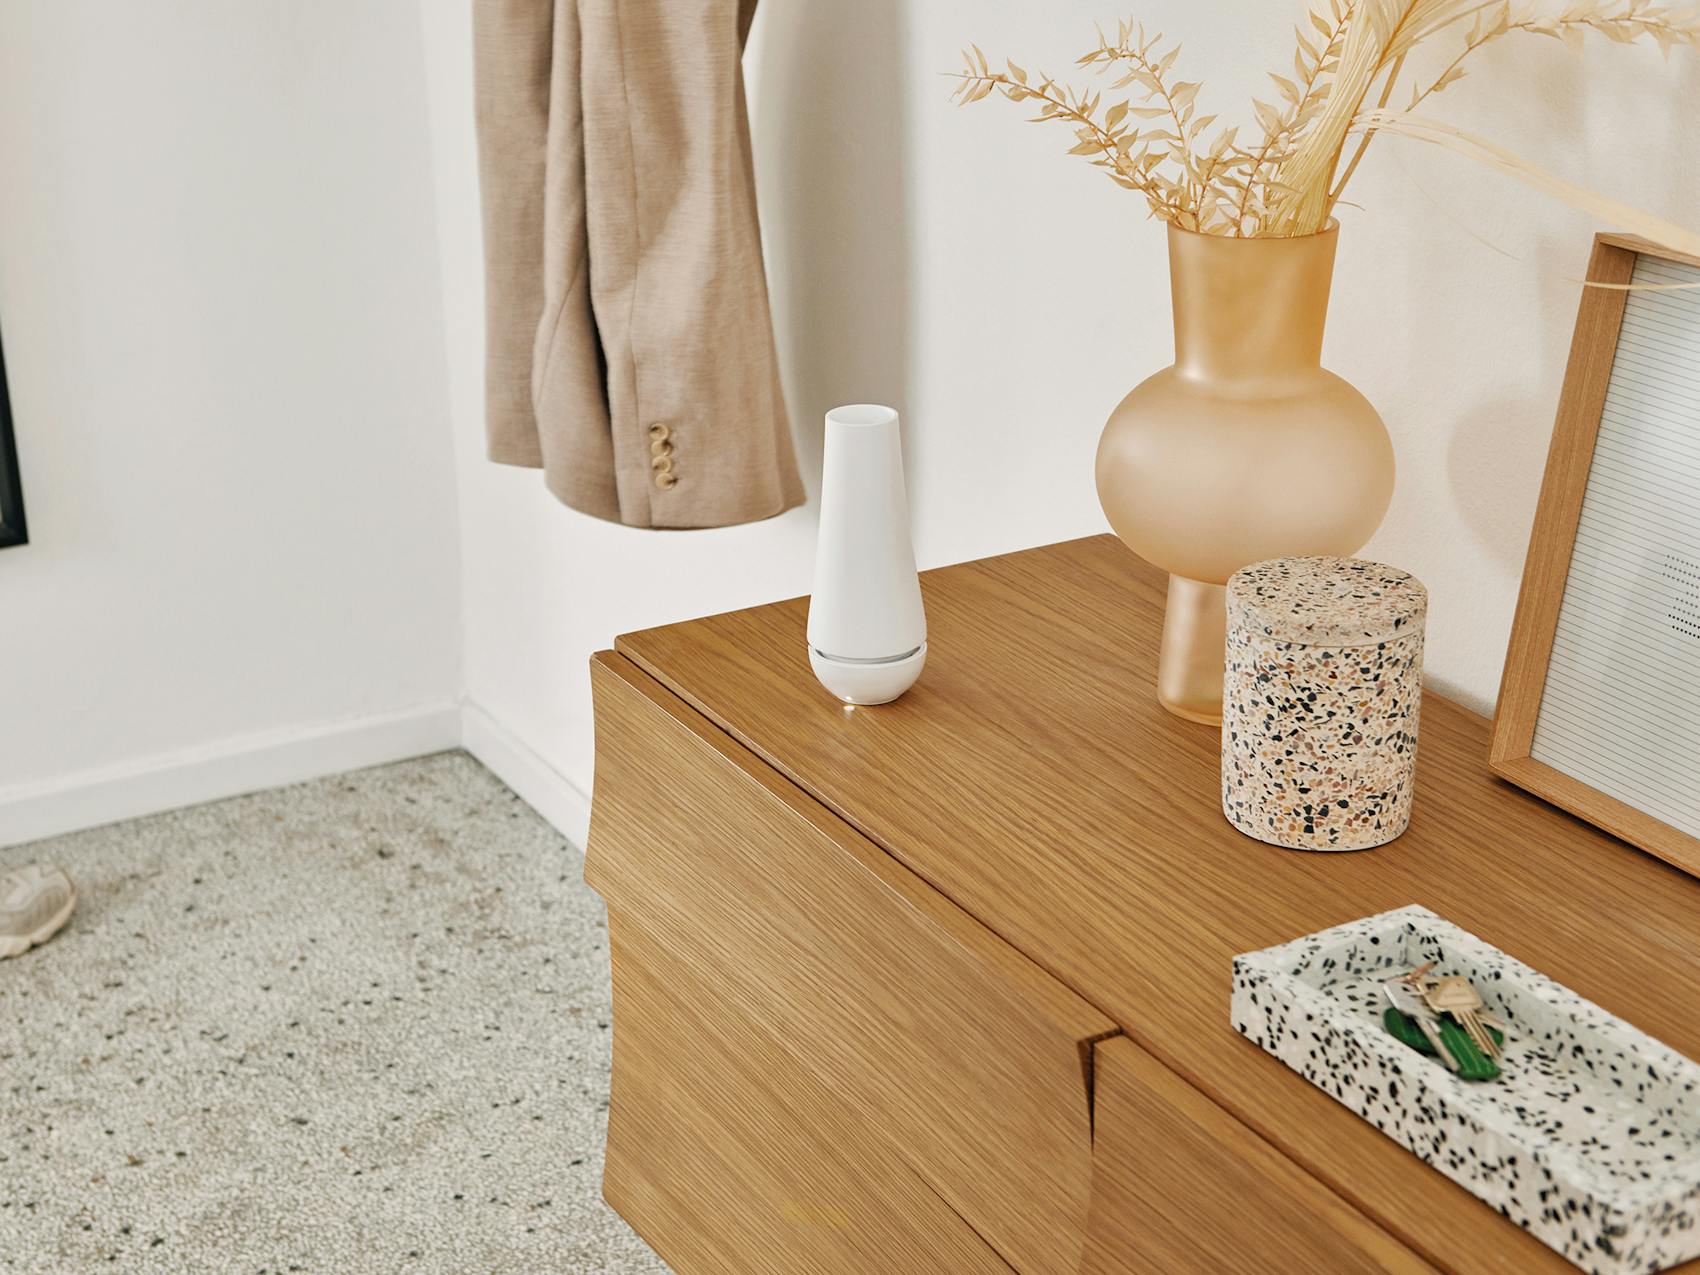 Tina aroma diffuser by Stadler Form on a sideboard in an entrance area